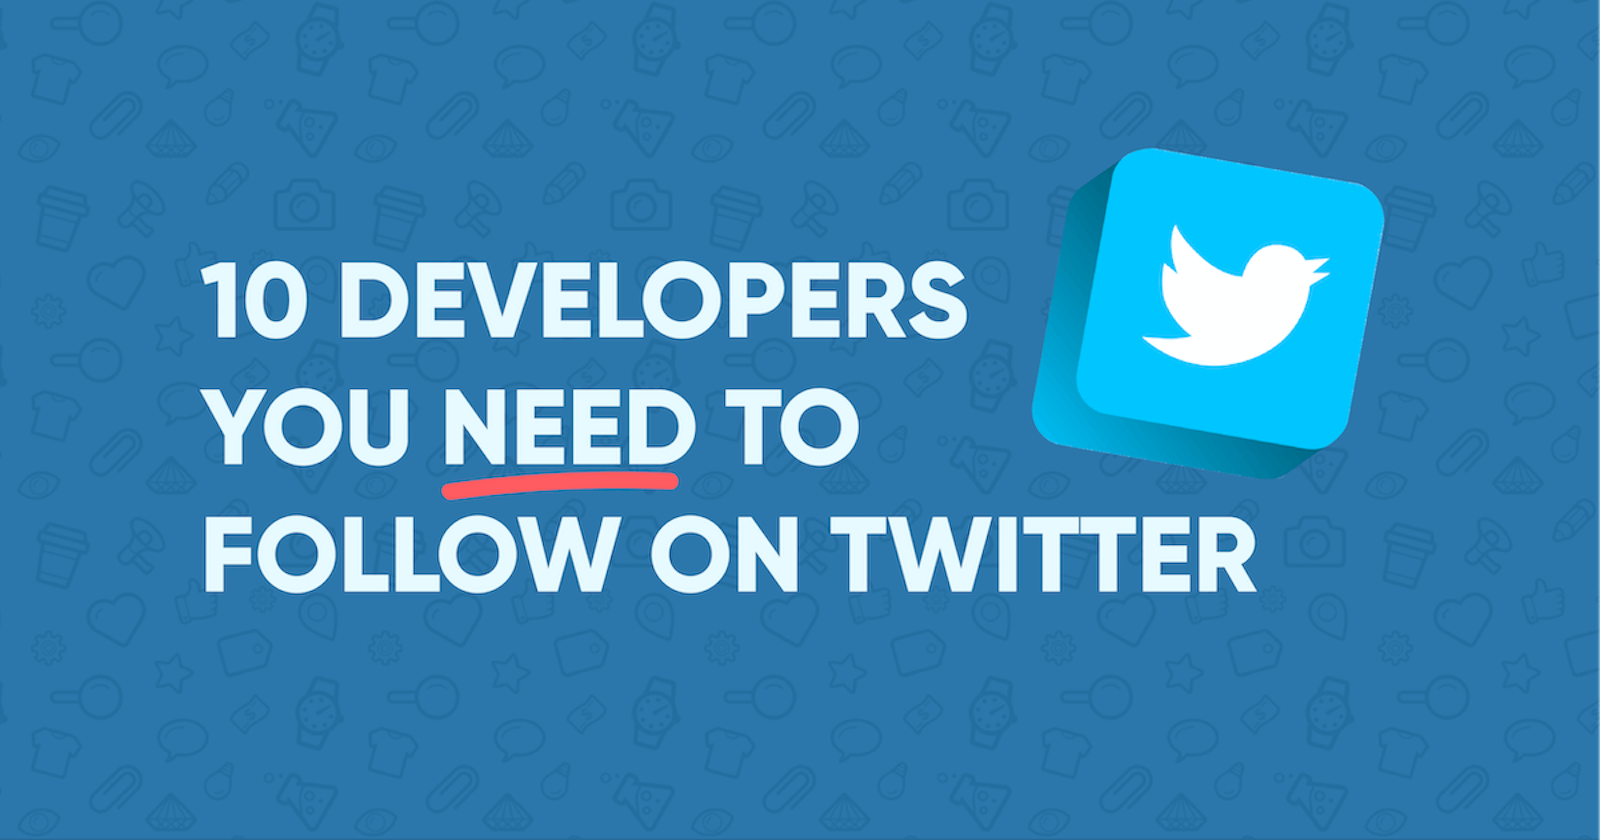 10 Developers You Need to Follow on Twitter